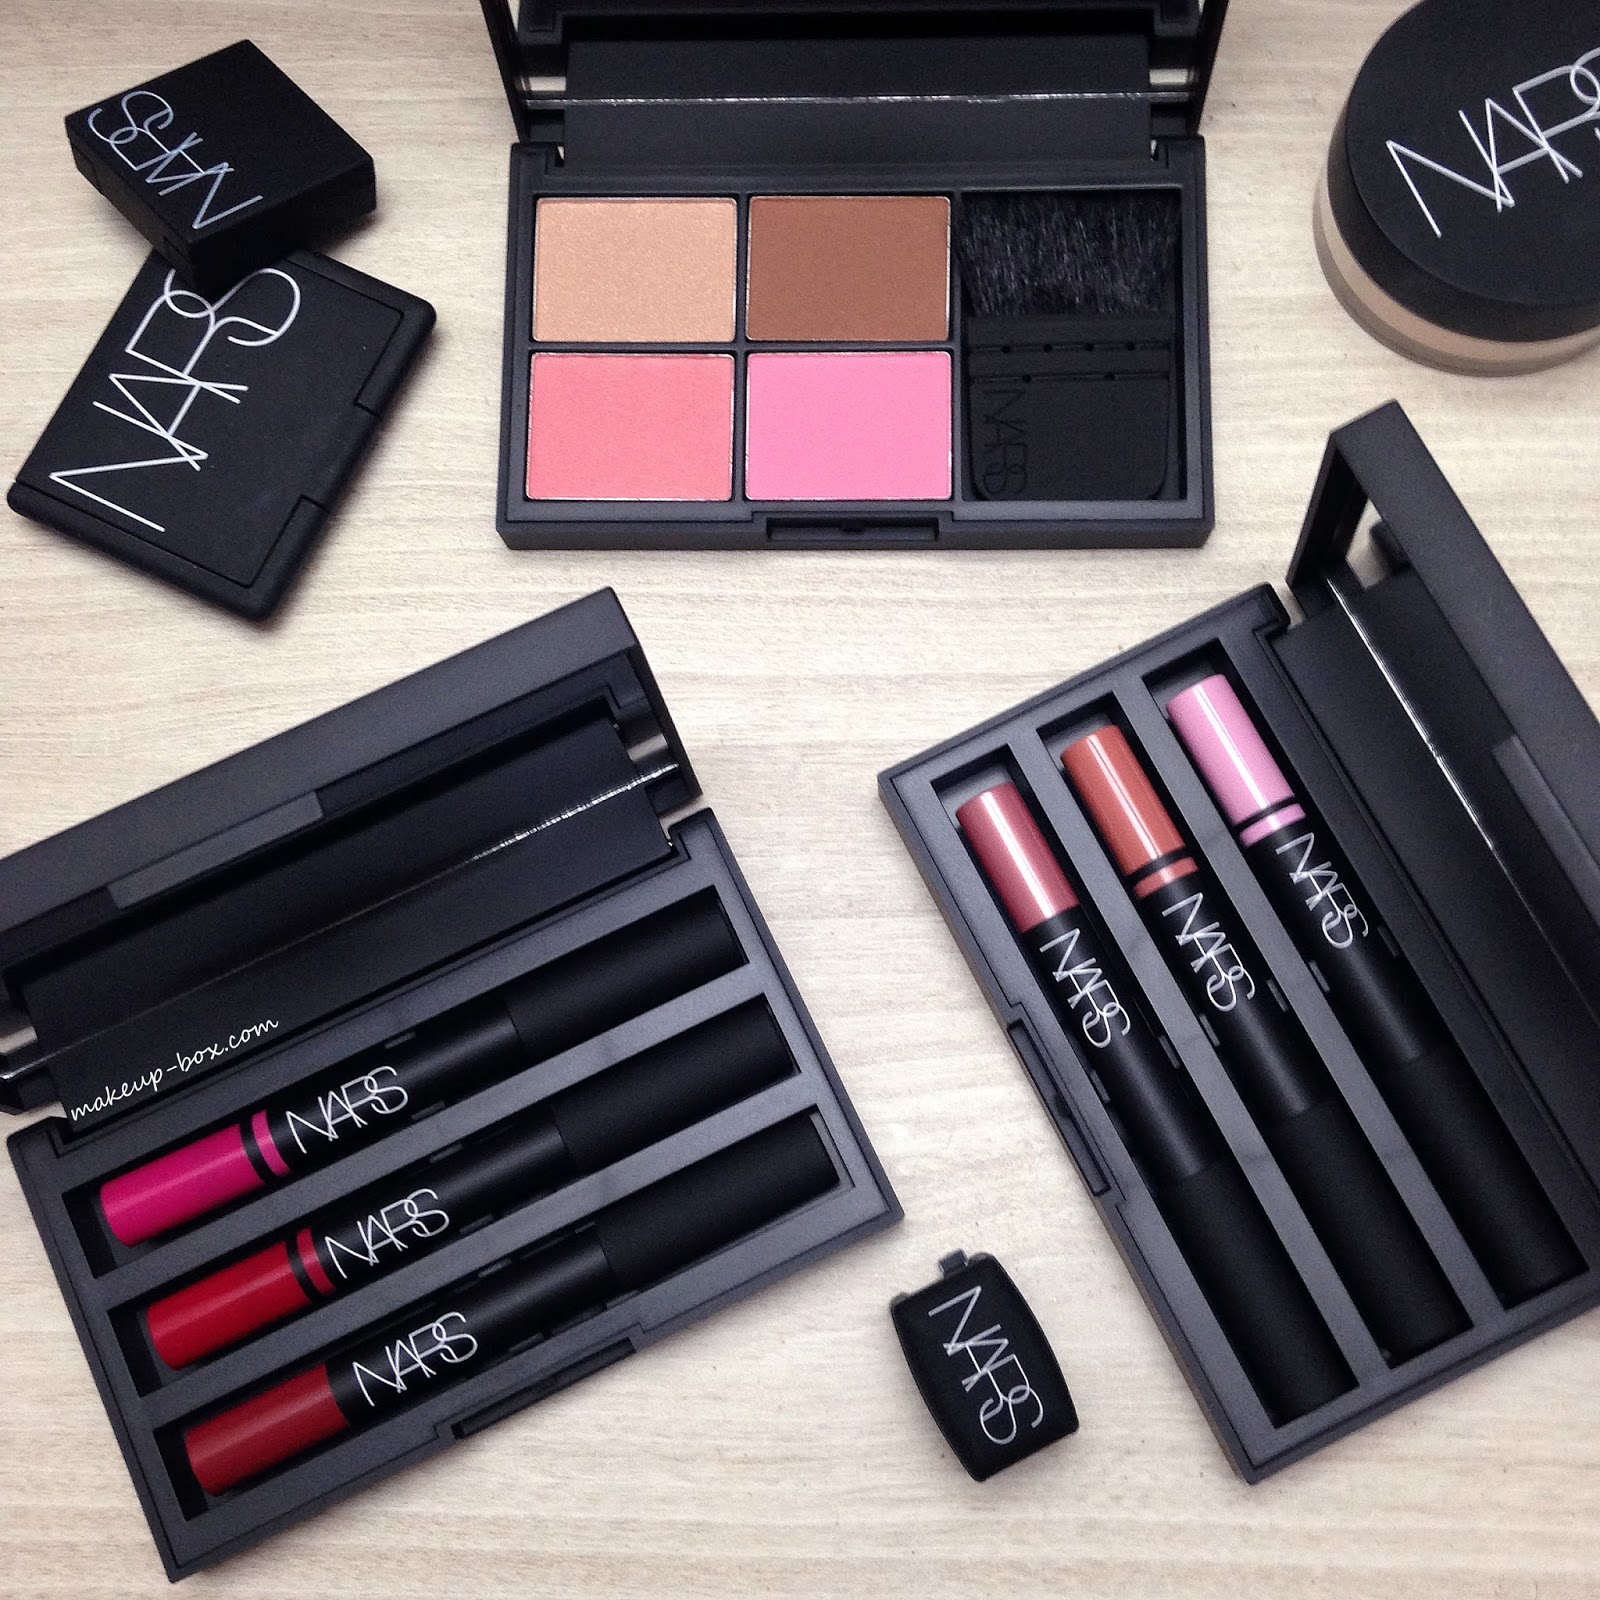 The Makeup Box: Blame On NARS Summer Gifting Kits: Swatches and Overview